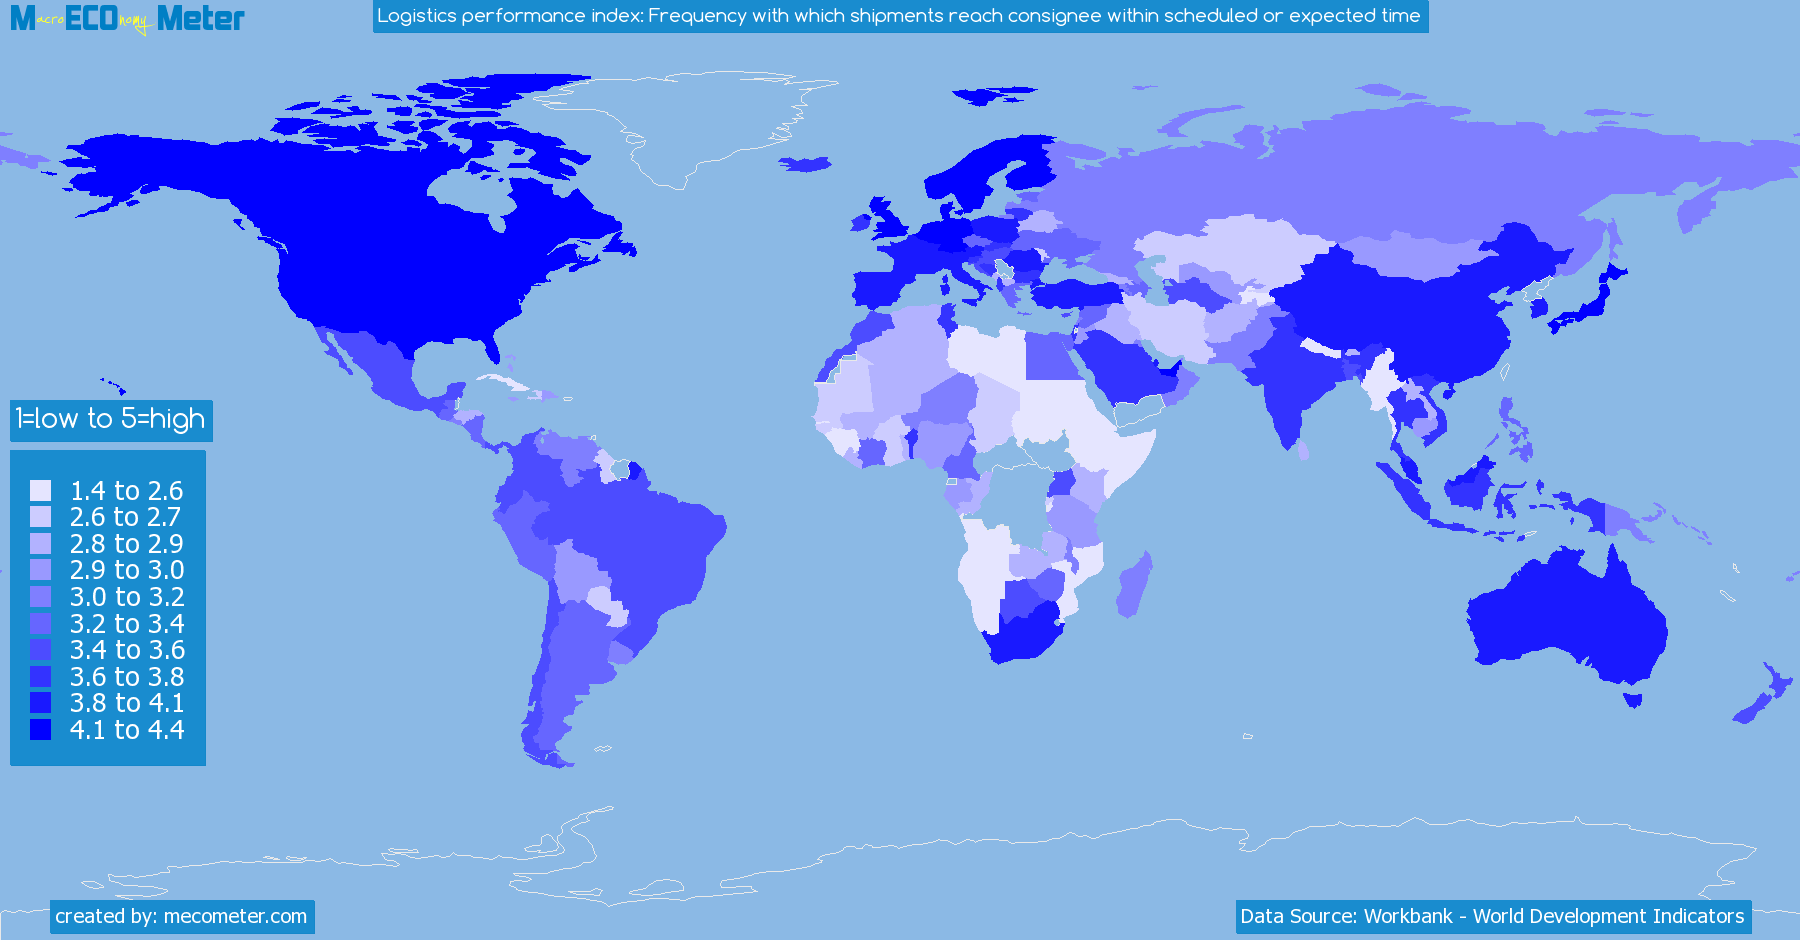 Worldmap of all countries colored to reflect the values of Logistics performance index: Frequency with which shipments reach consignee within scheduled or expected time